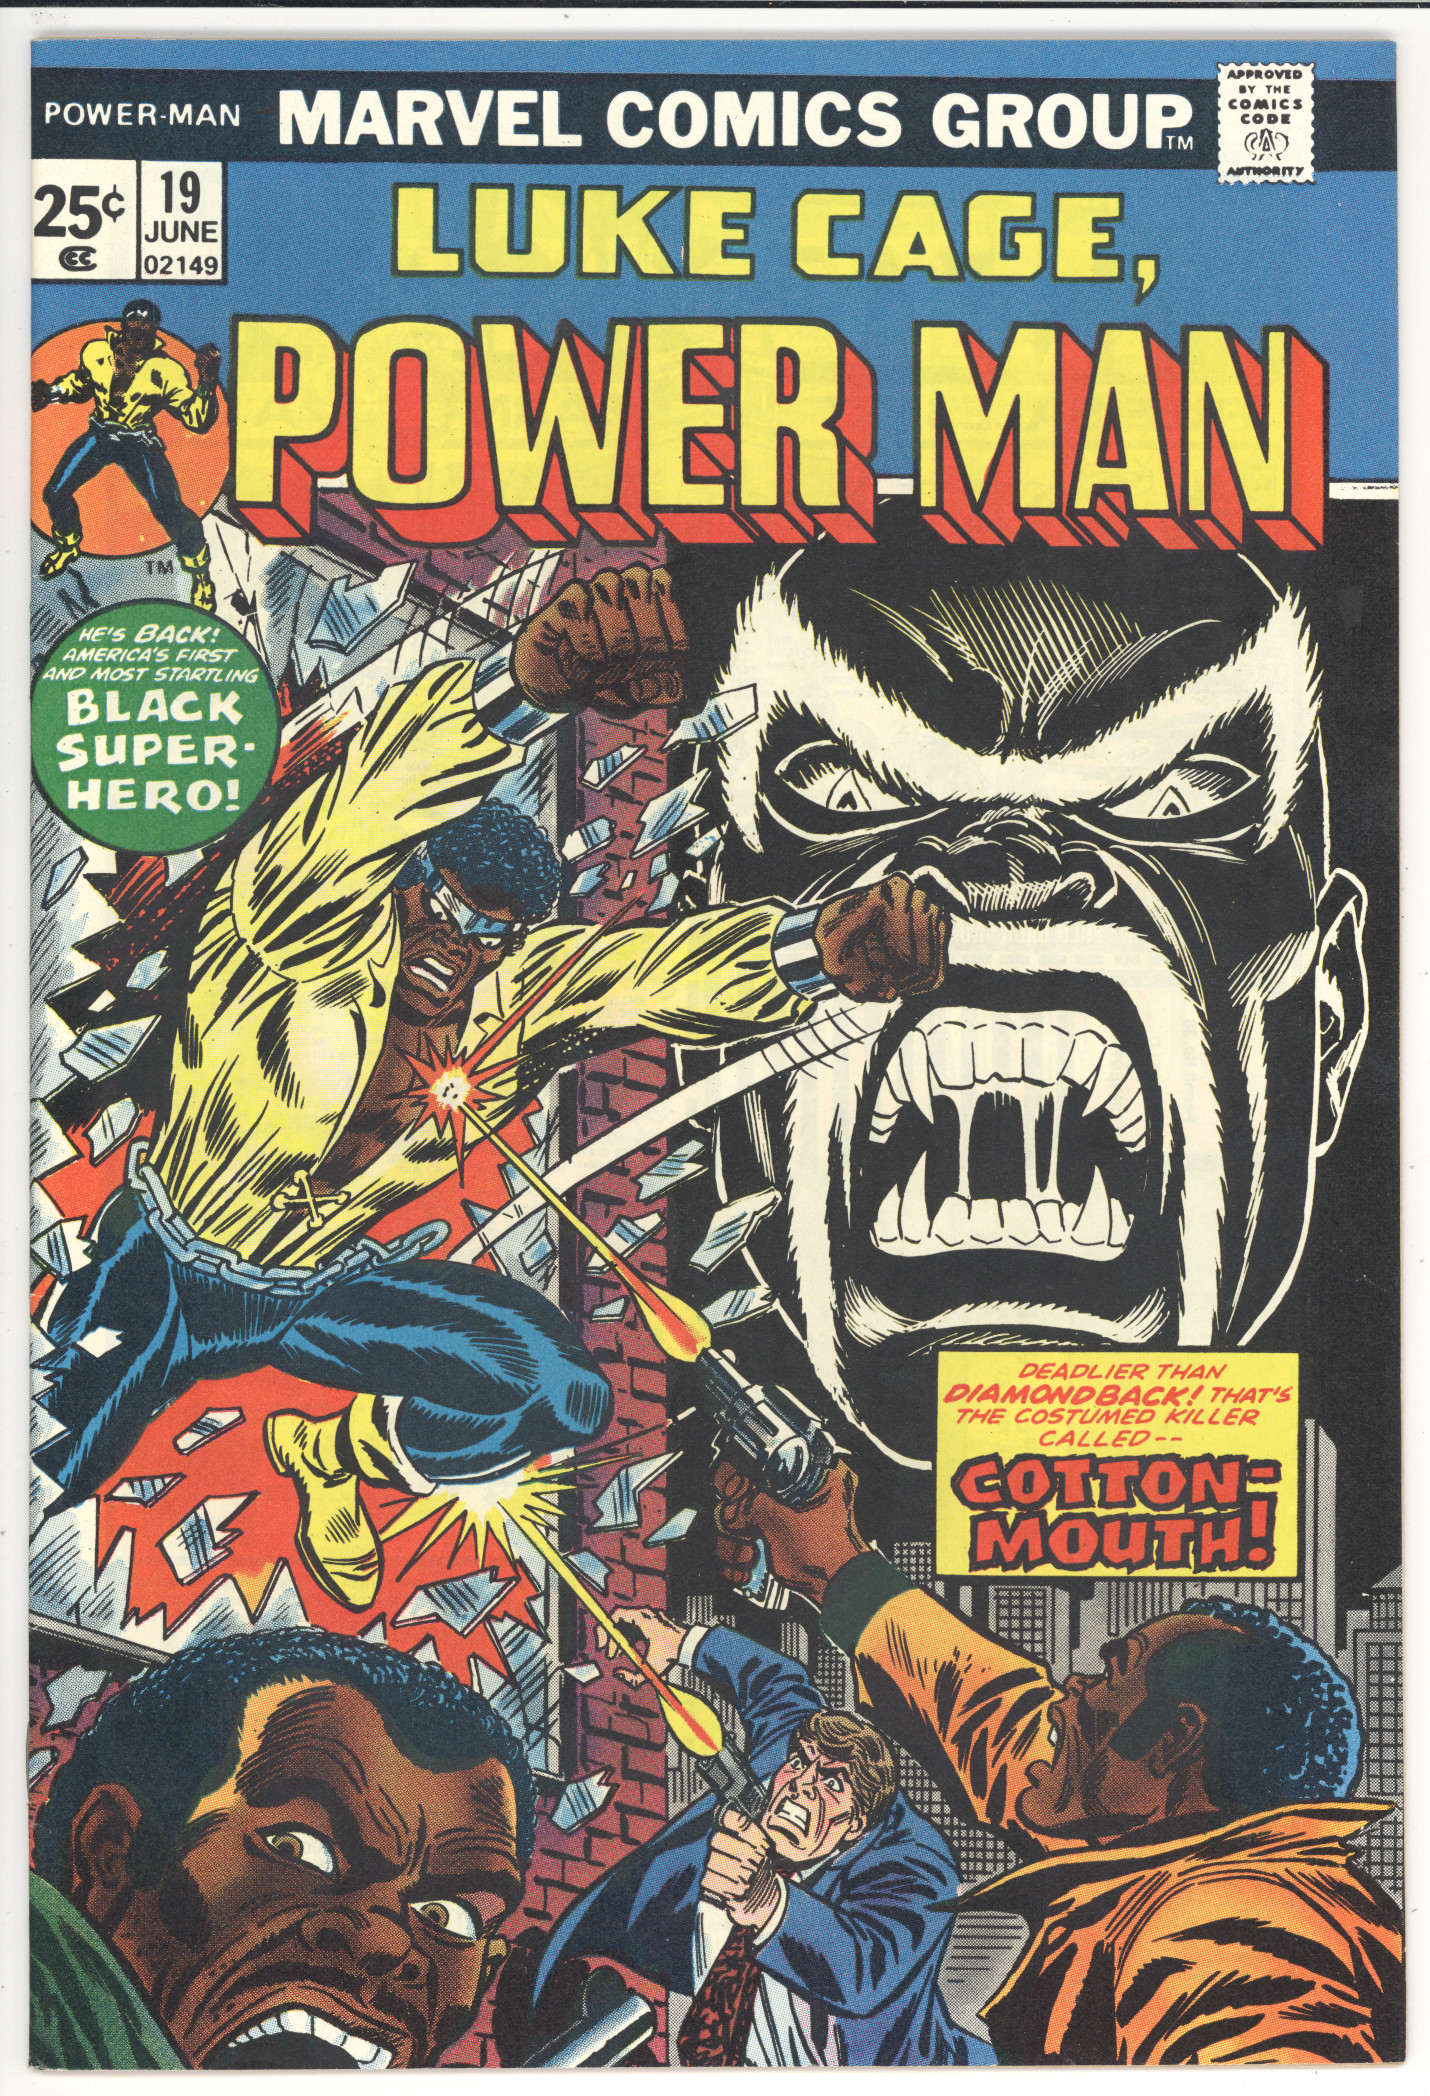 Power Man #19 front